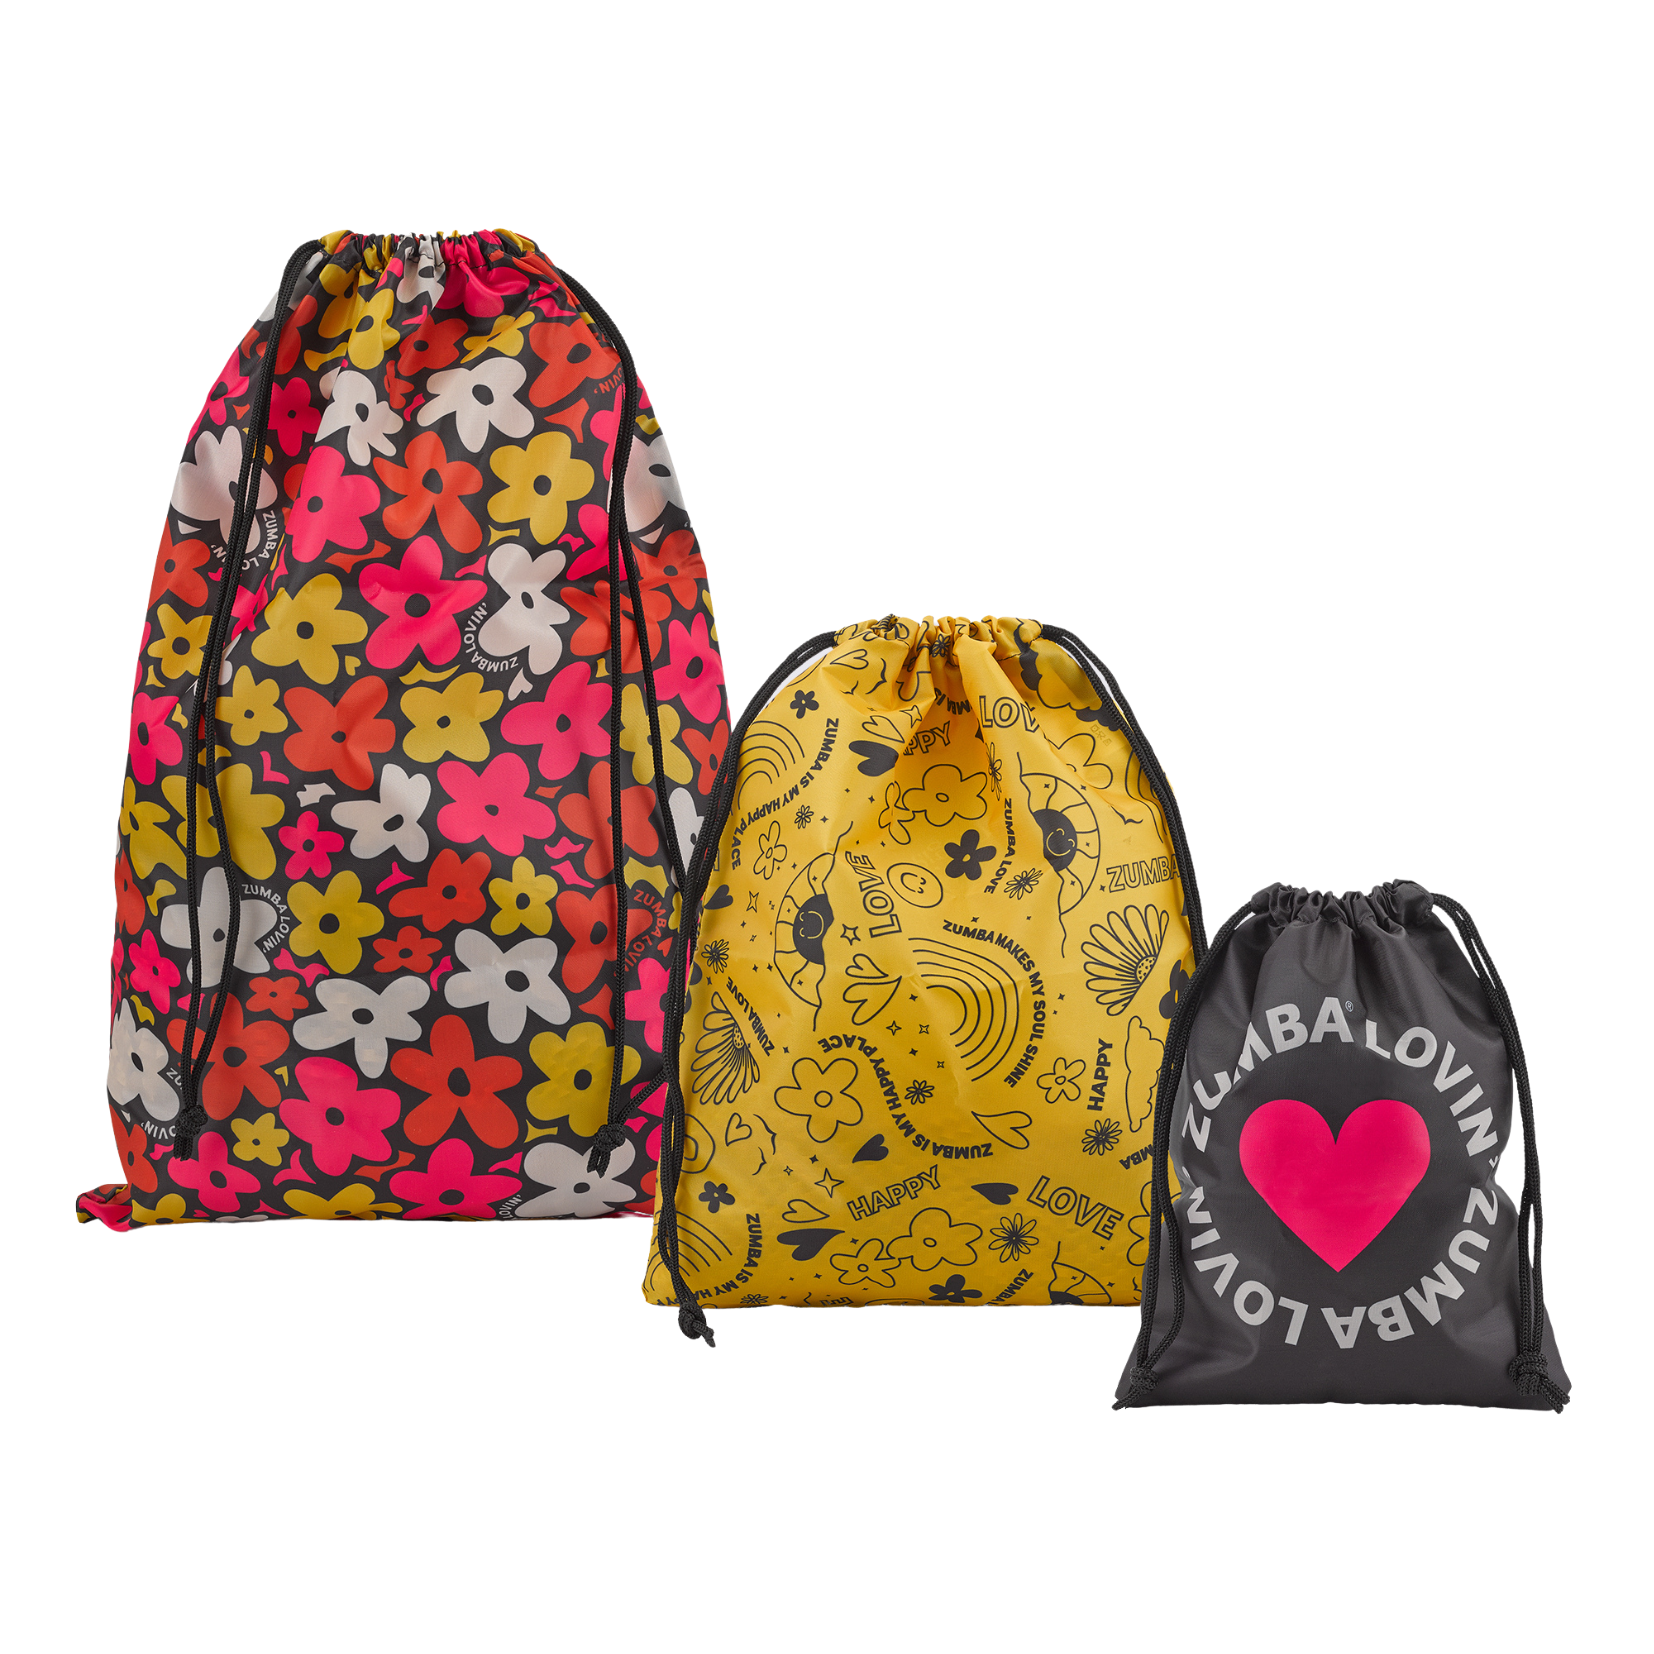 You In Bloom Zumba Drawstring Bags 3PK (Special Order)